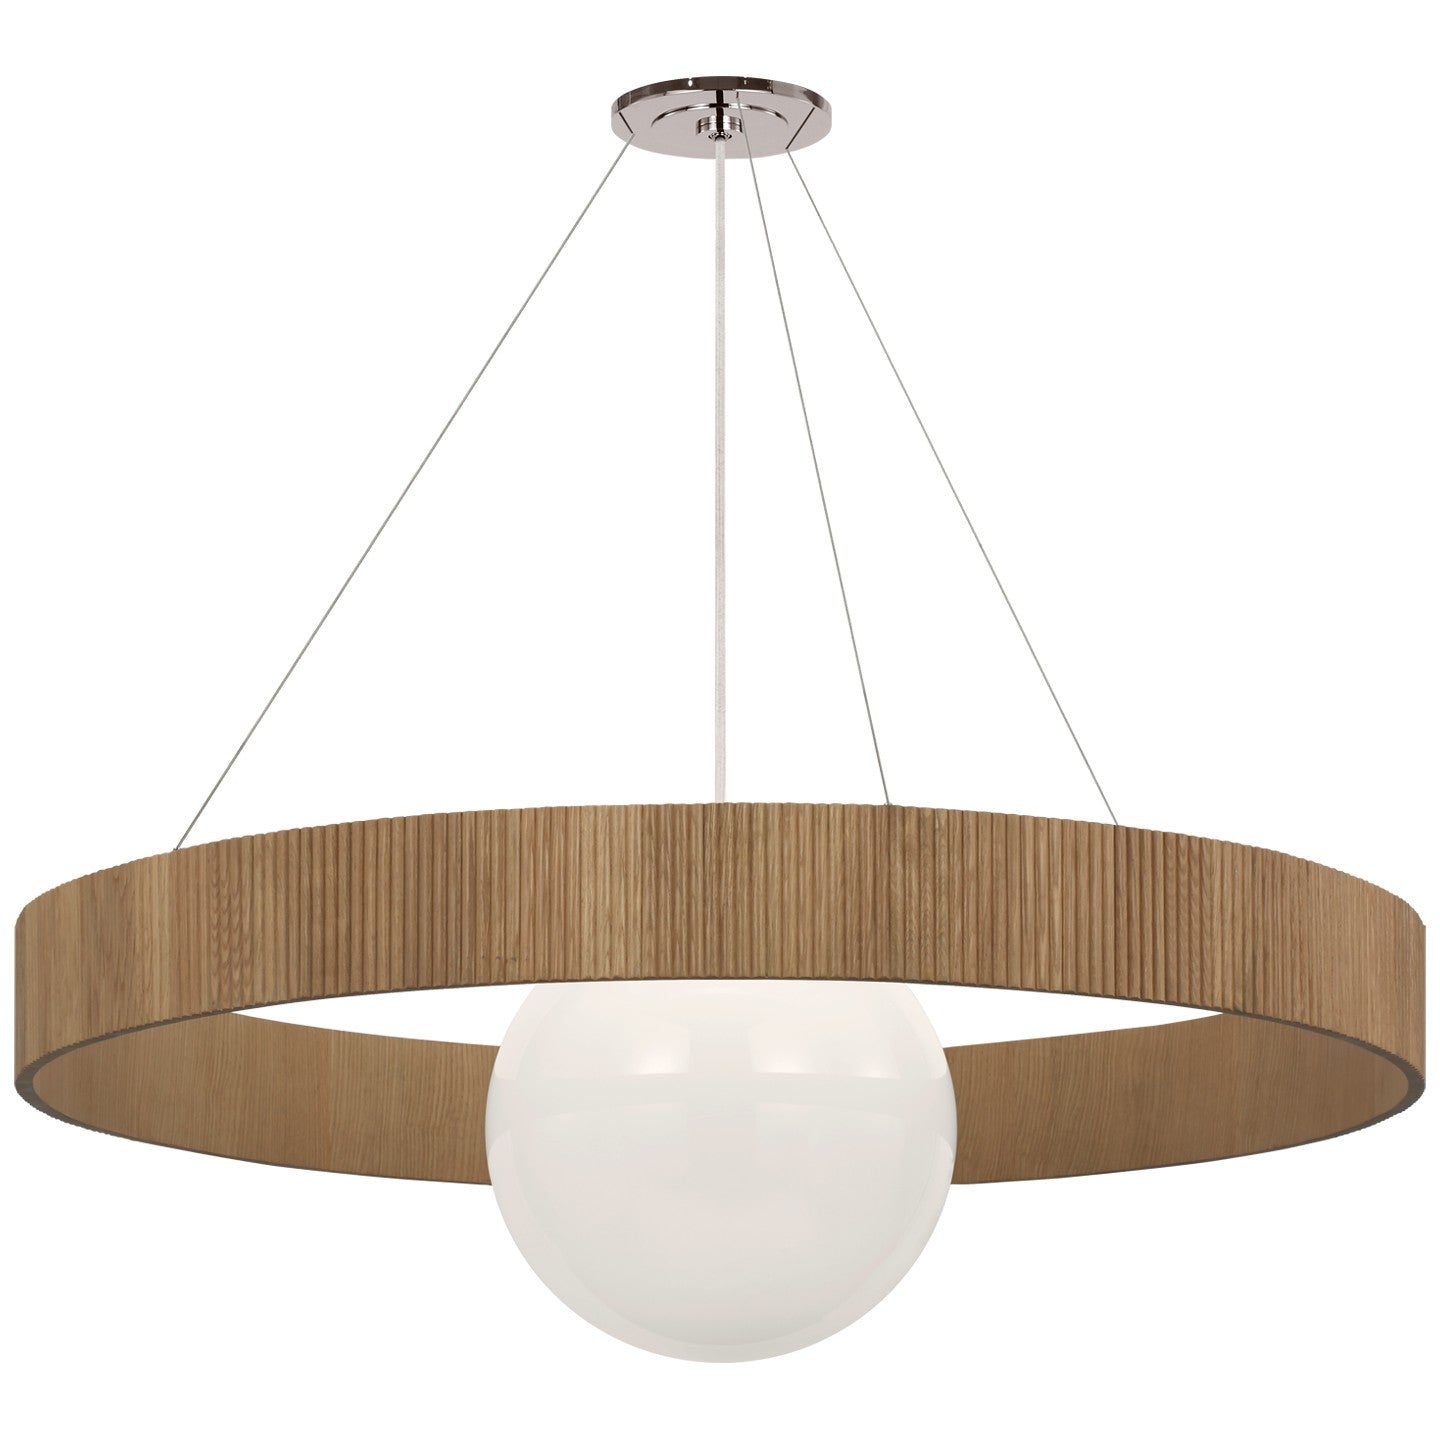 Visual Comfort Signature Canada - LED Chandelier - Arena - Polished Nickel and White Glass- Union Lighting Luminaires Decor